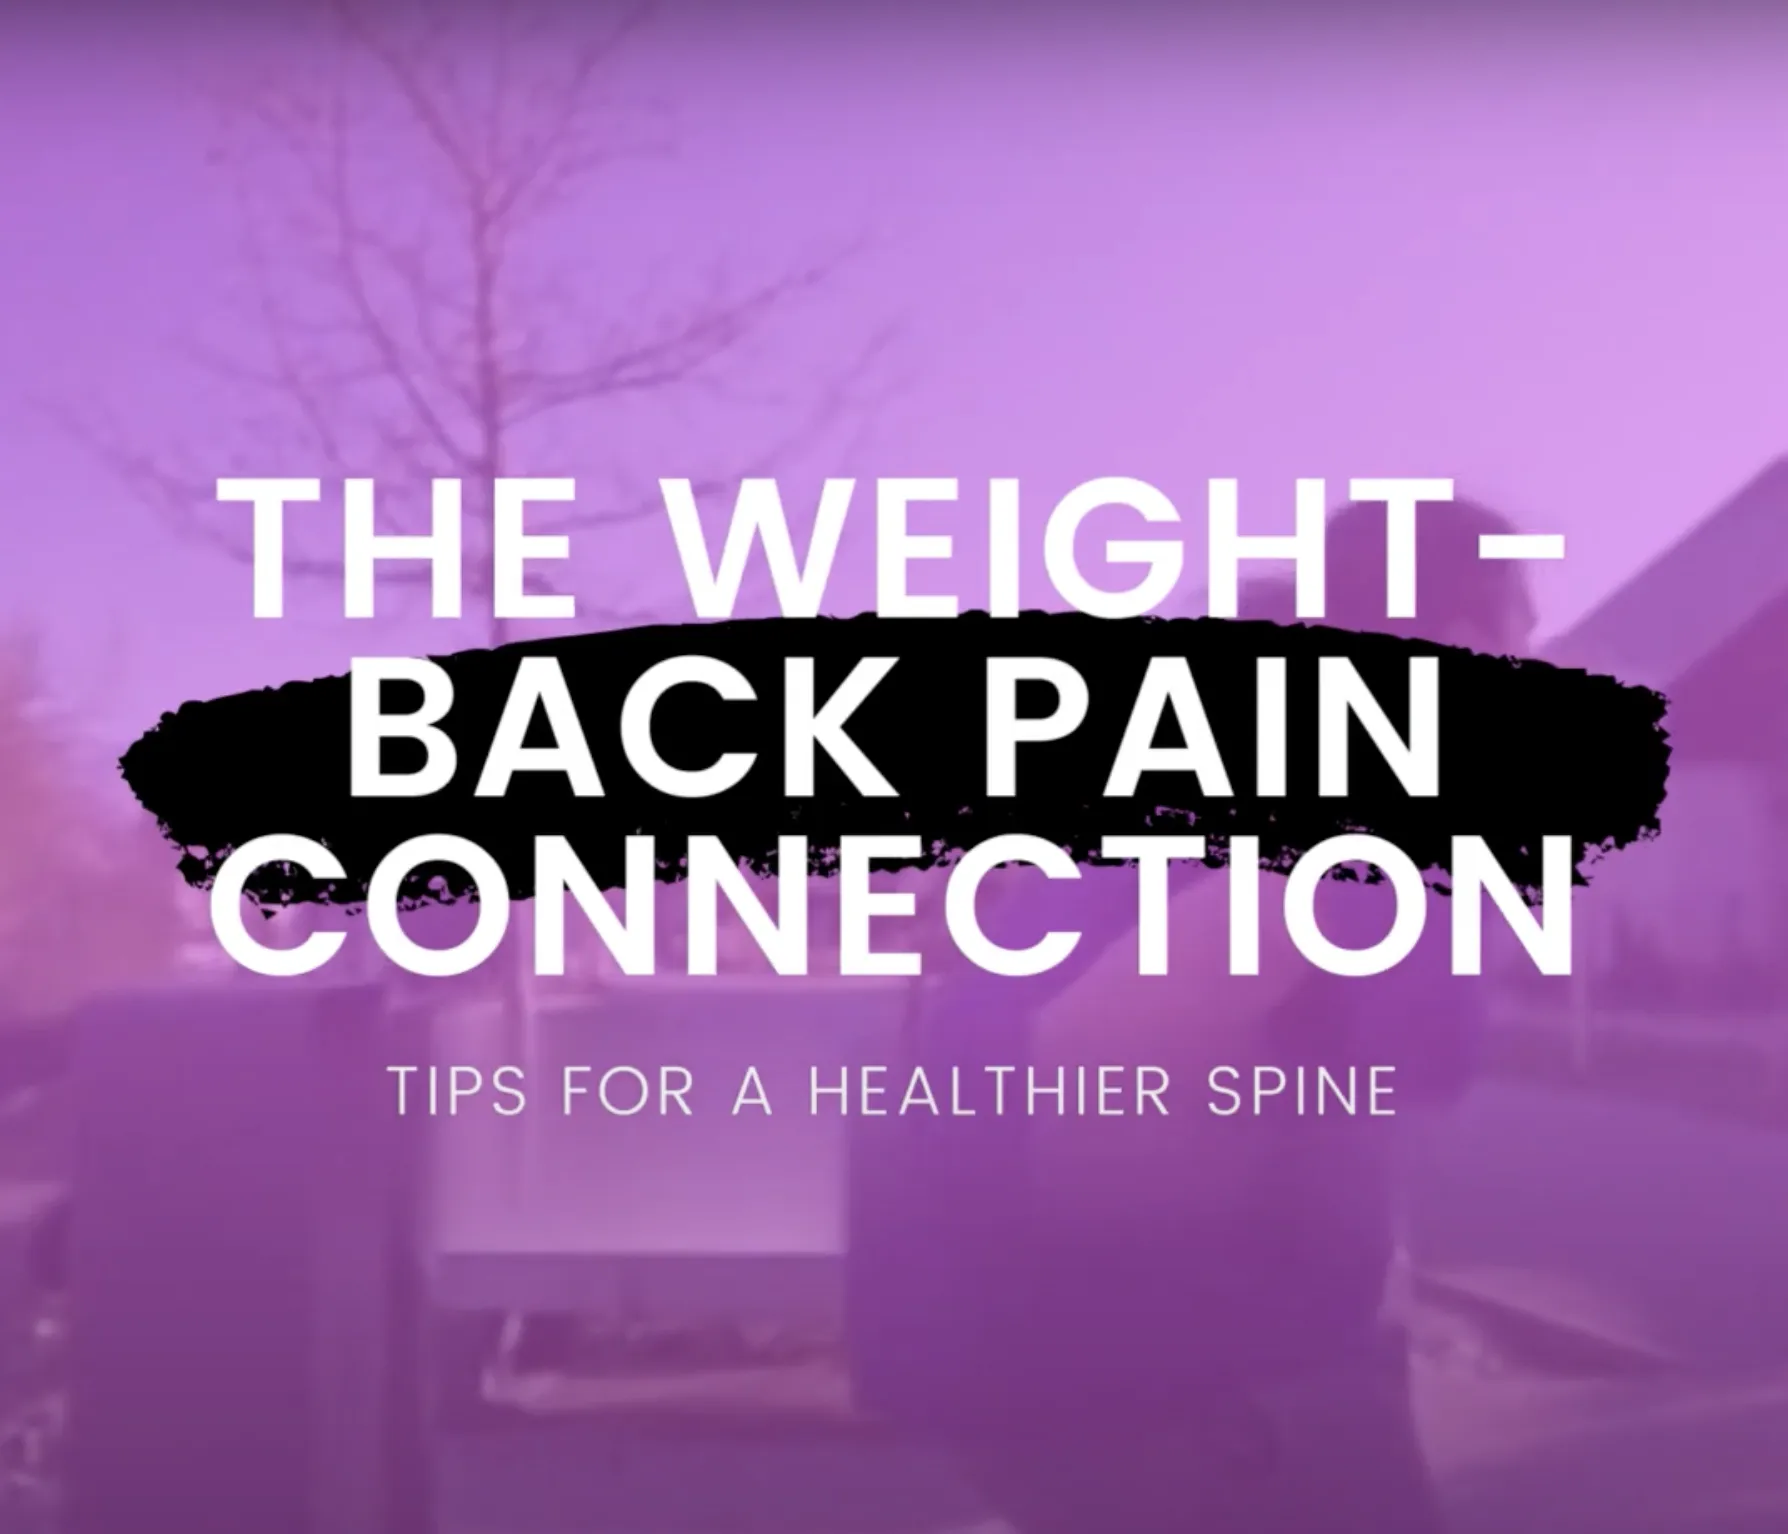 Reduce Your Risk of Spine-Related Issues: Maintaining a Healthy Weight and Good Posture